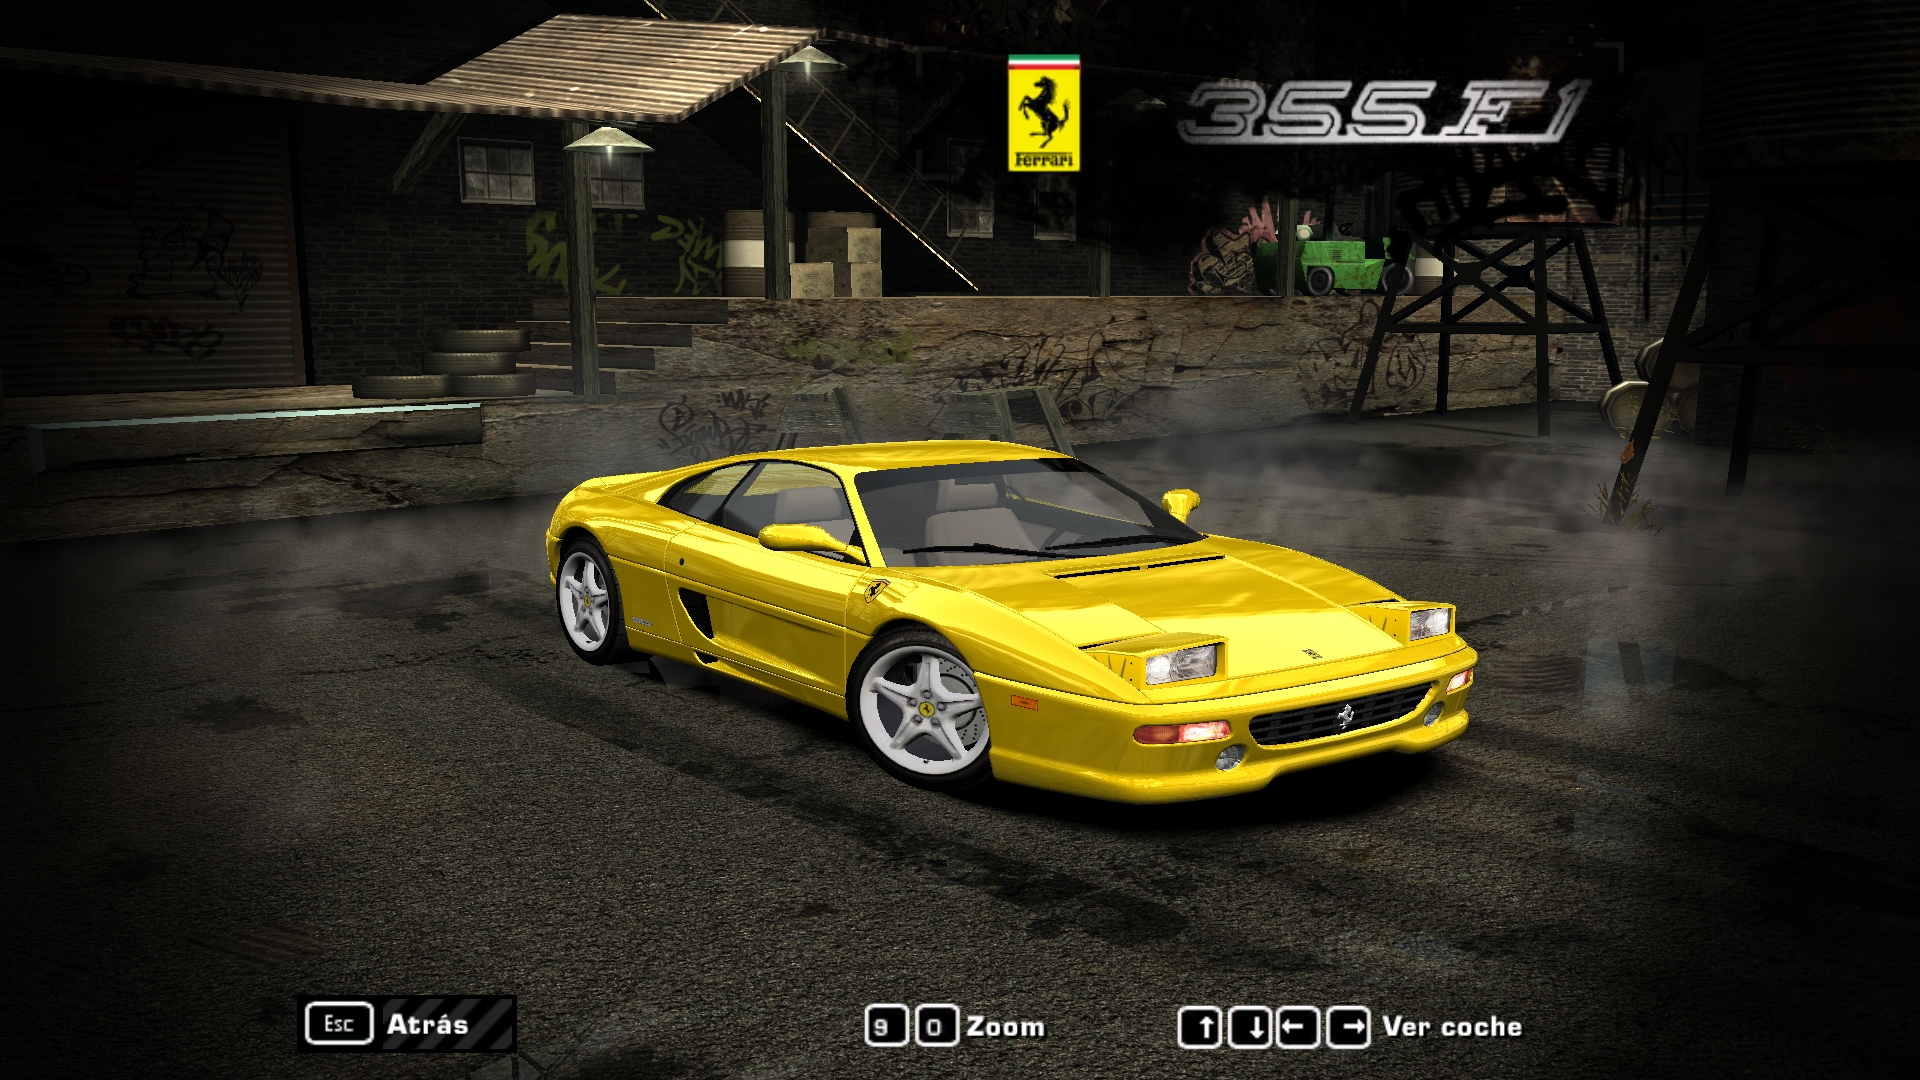 Need For Speed Most Wanted Ferrari 355 F1